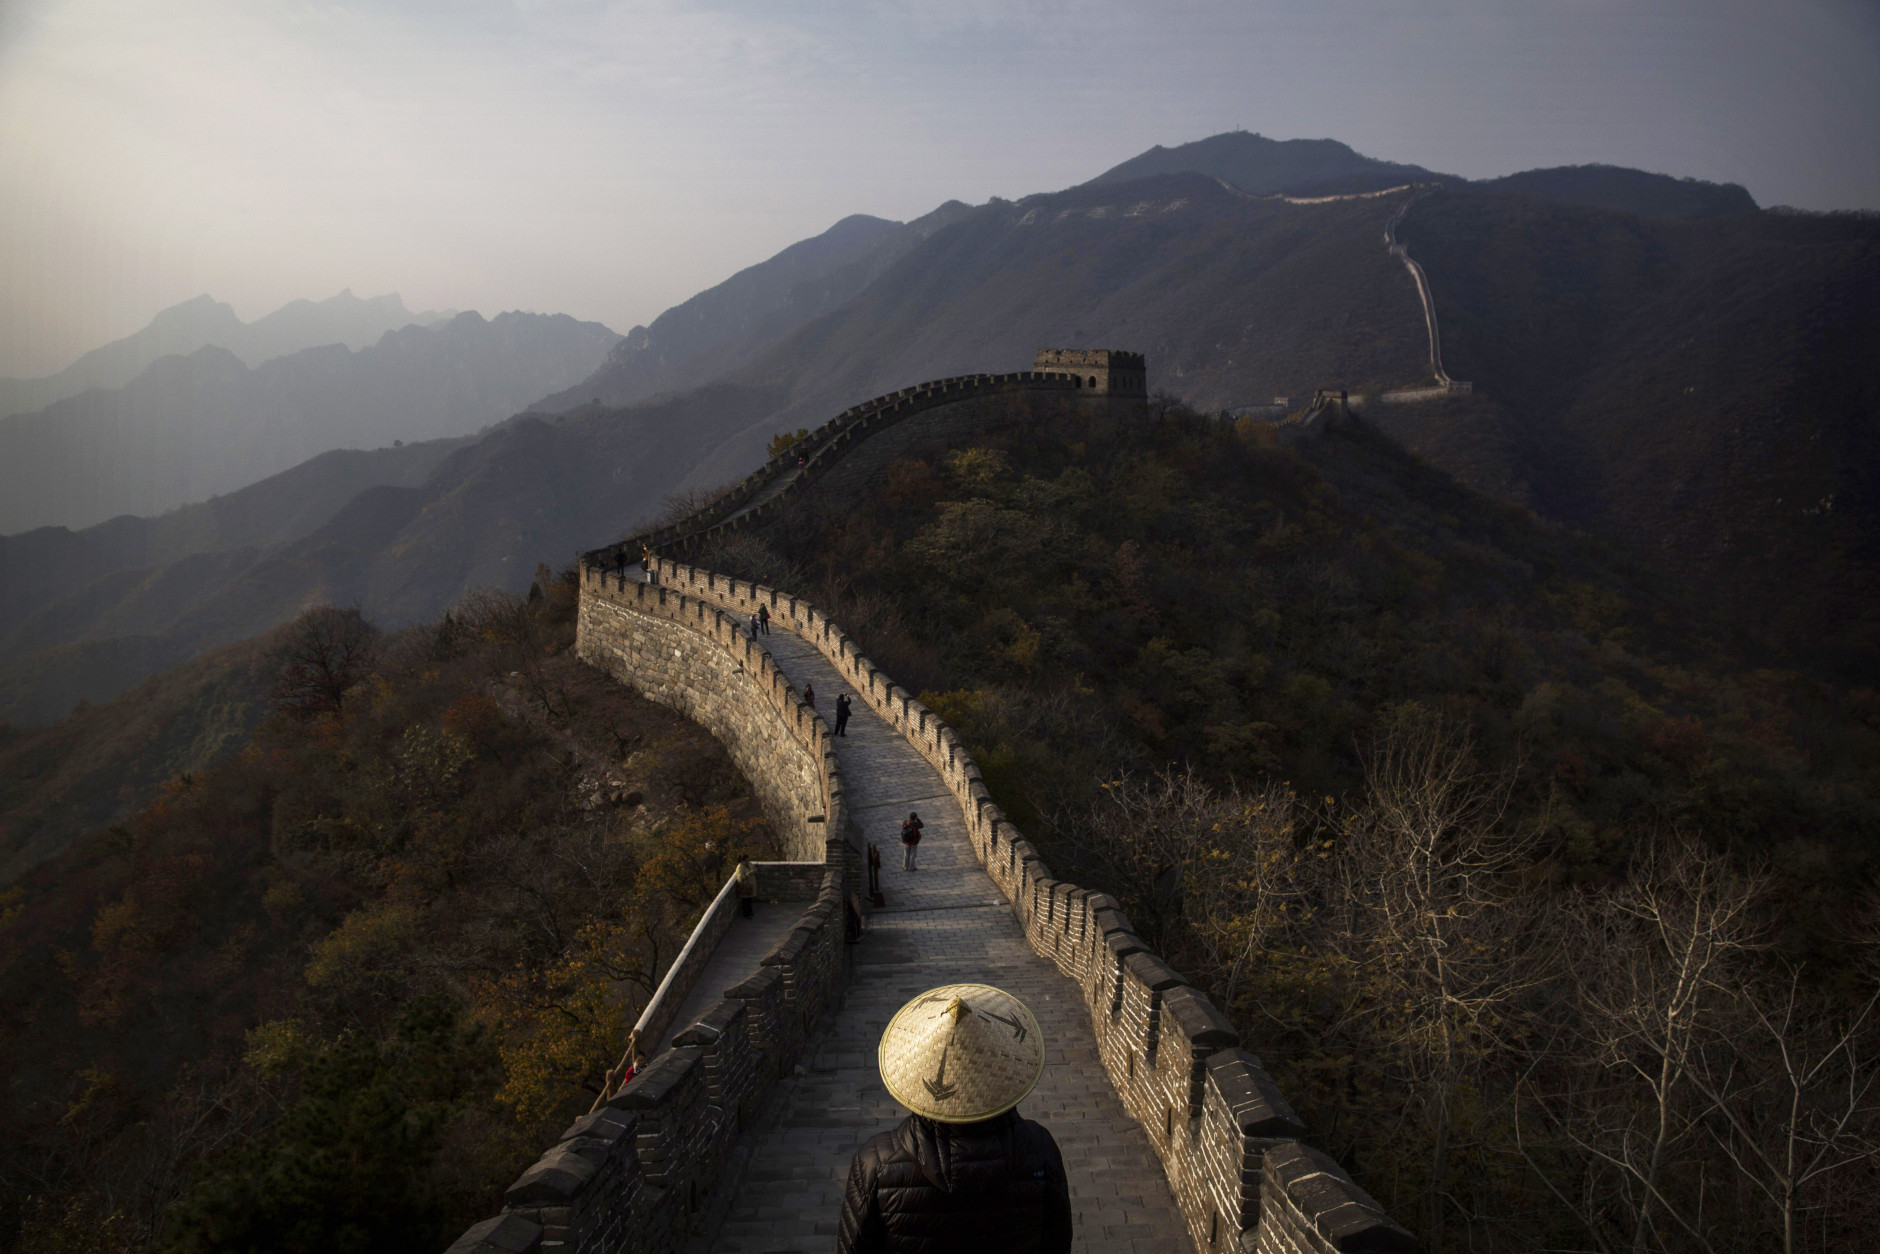 BEIJING, CHINA - OCTOBER 28: Chinese and foreign toursits walk on a section of the Great Wall of China on October 28, 2014 in Mutianyu, near Beijing, China.  (Photo by Kevin Frayer/Getty Images)